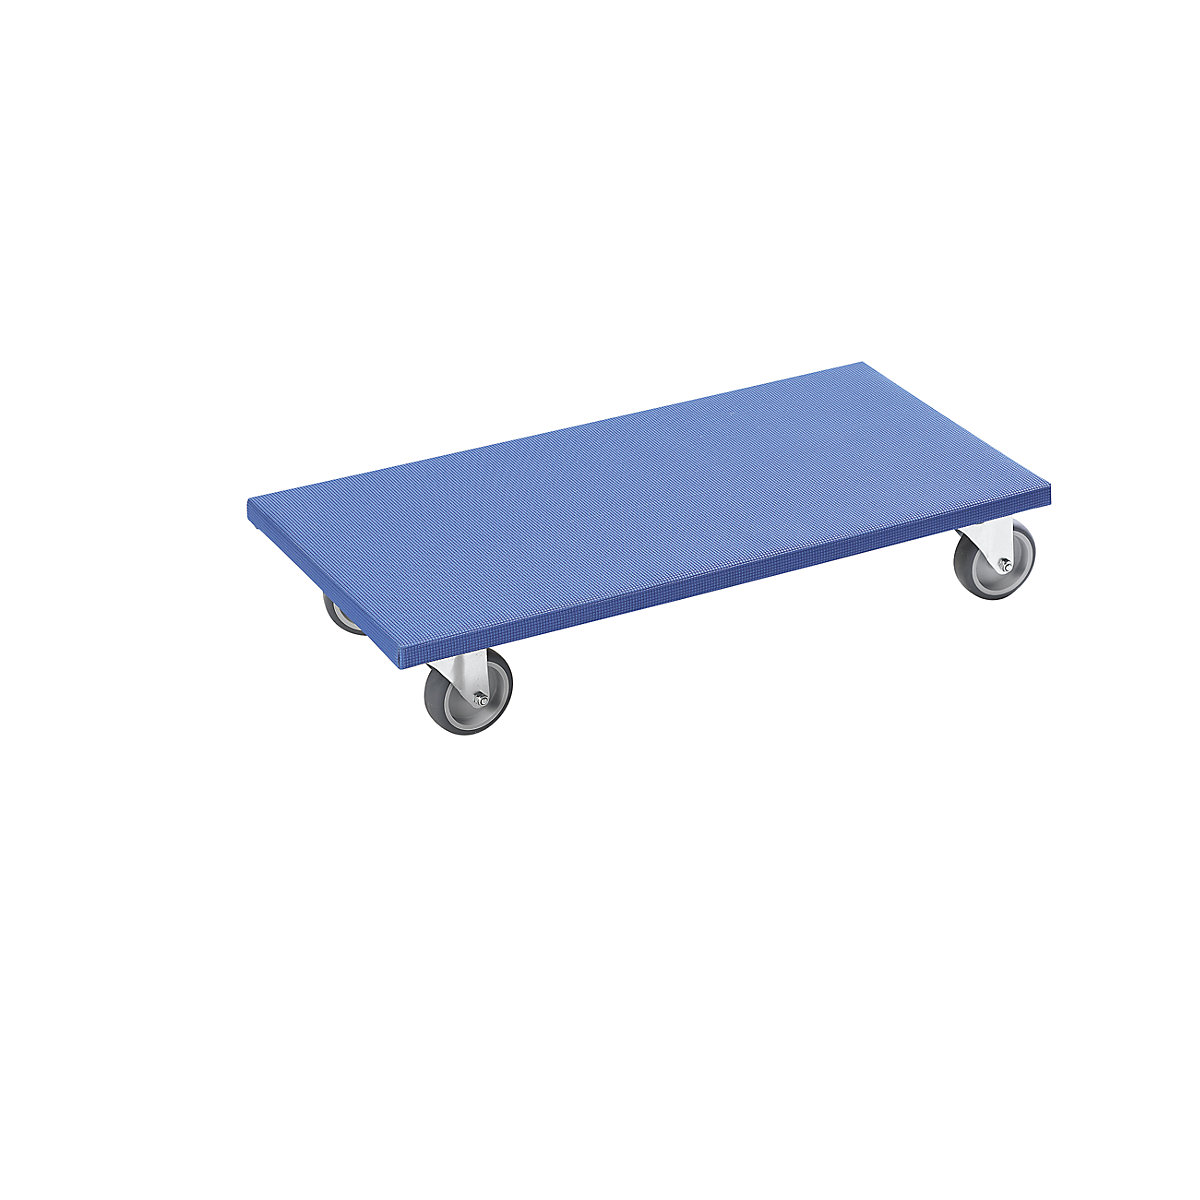 Furniture dolly, LxWxH 600 x 300 x 120 mm, pack of 2, 5+ packs-6